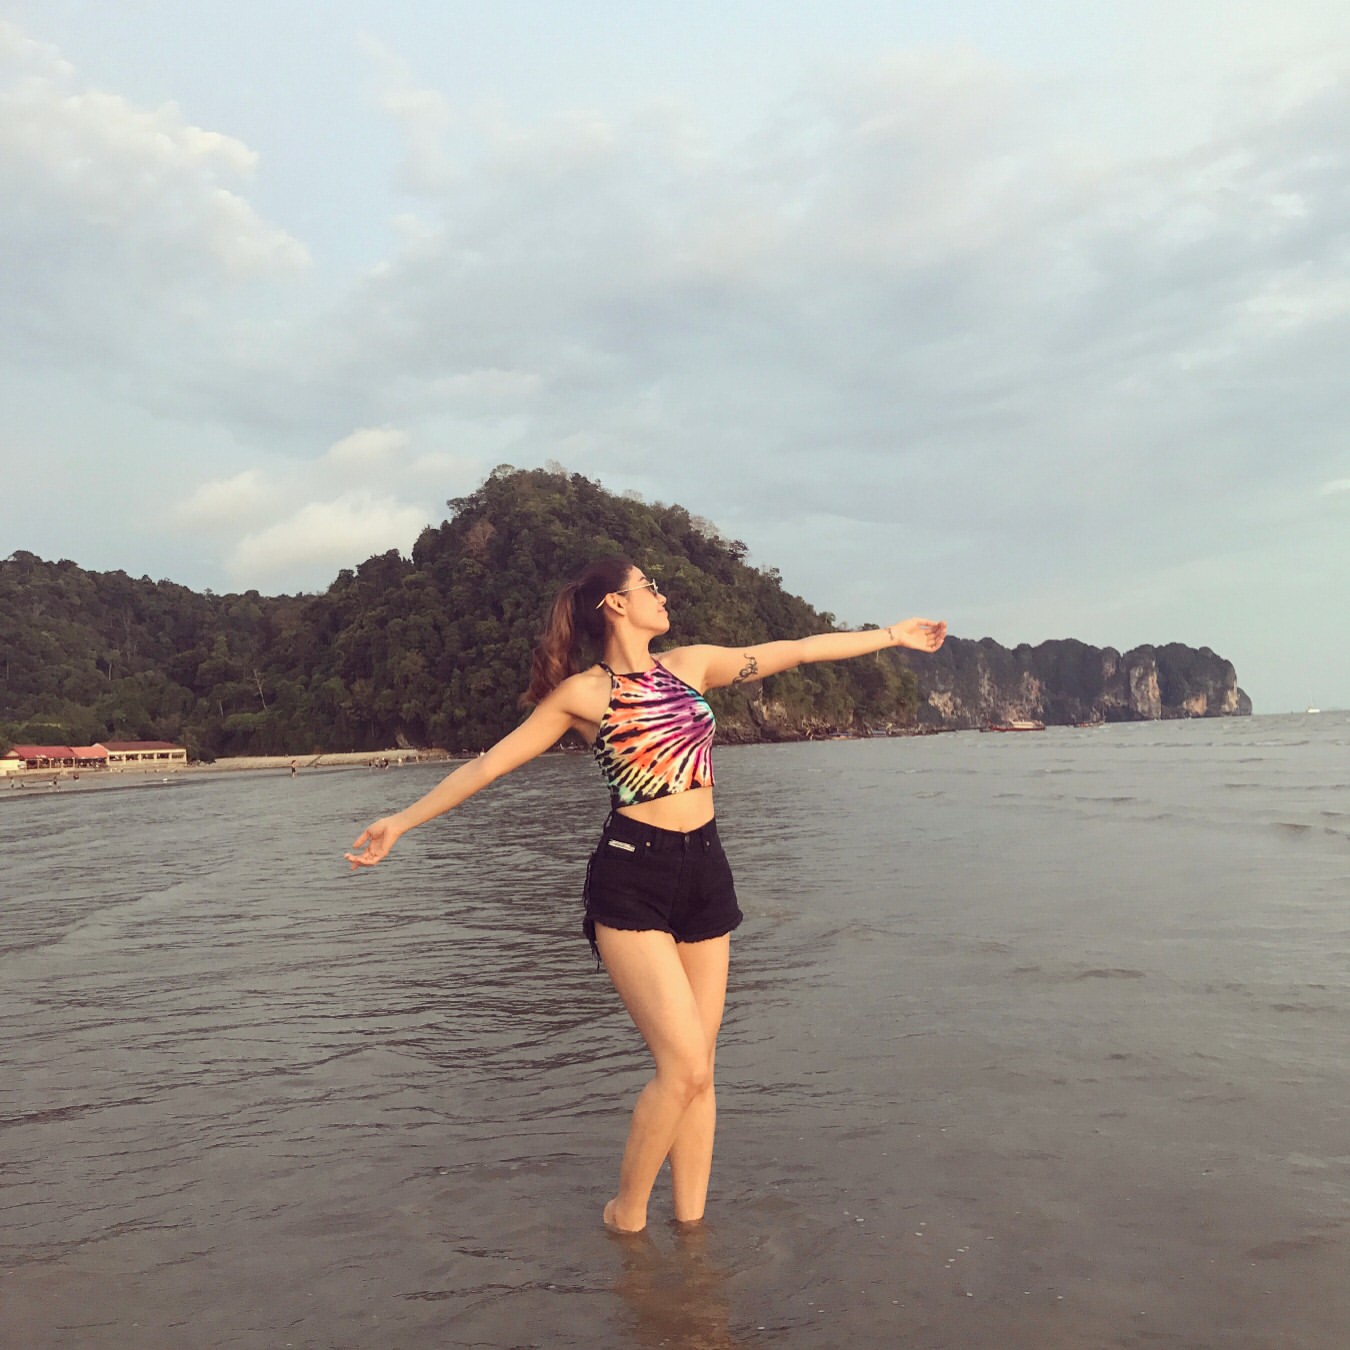 Thinzar Wint Kyaw Happy Time At The Beach In Myanmar New Holiday